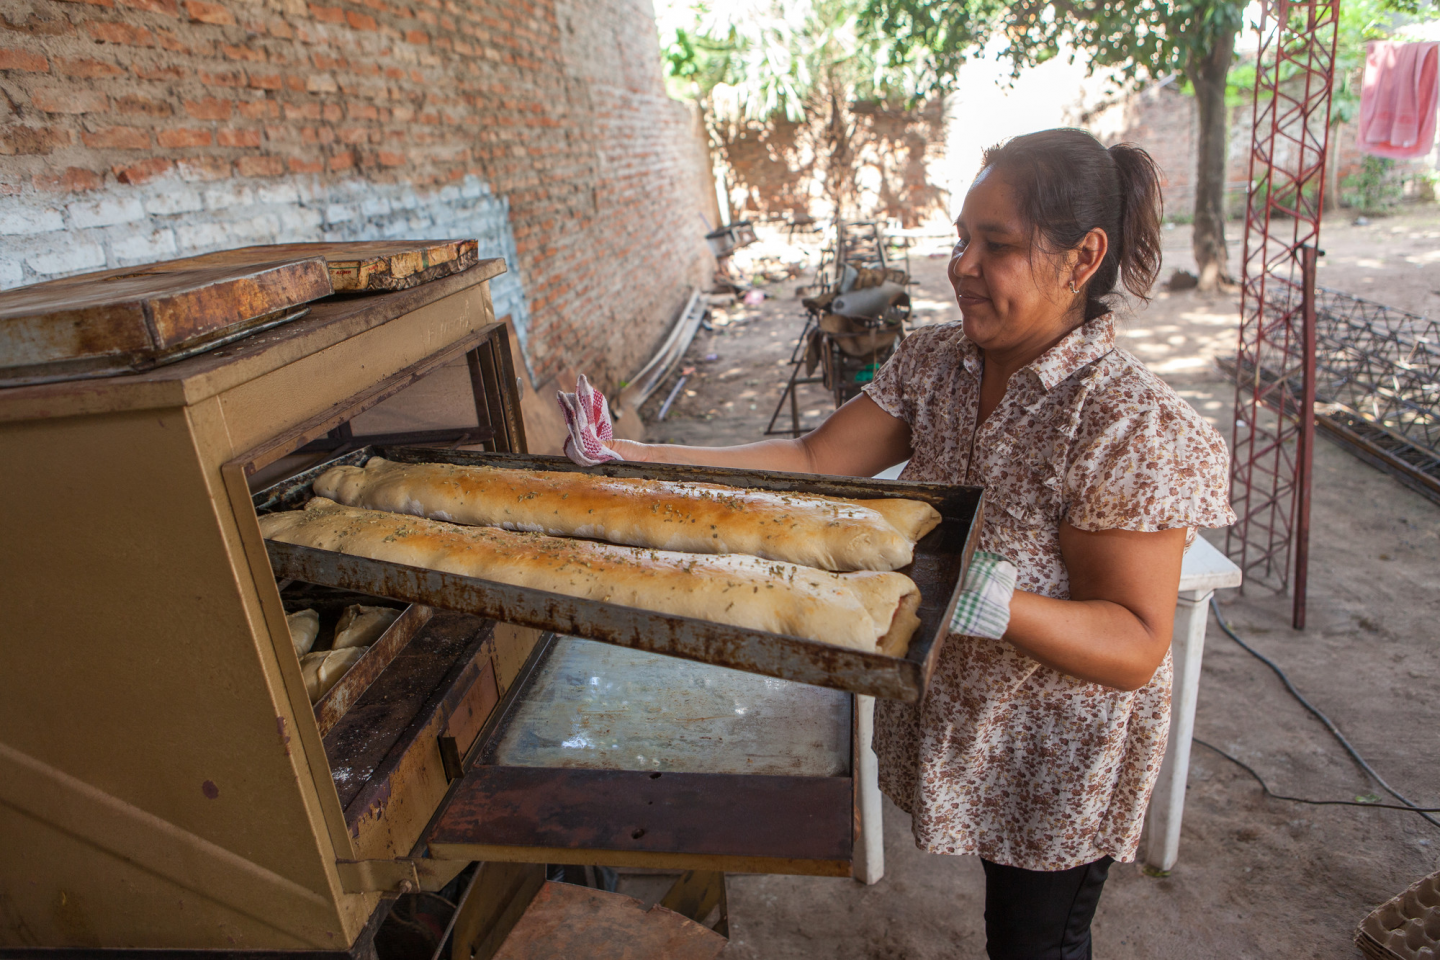 A Bolivian woman pulls out a tray of baked bread from an outdoor oven